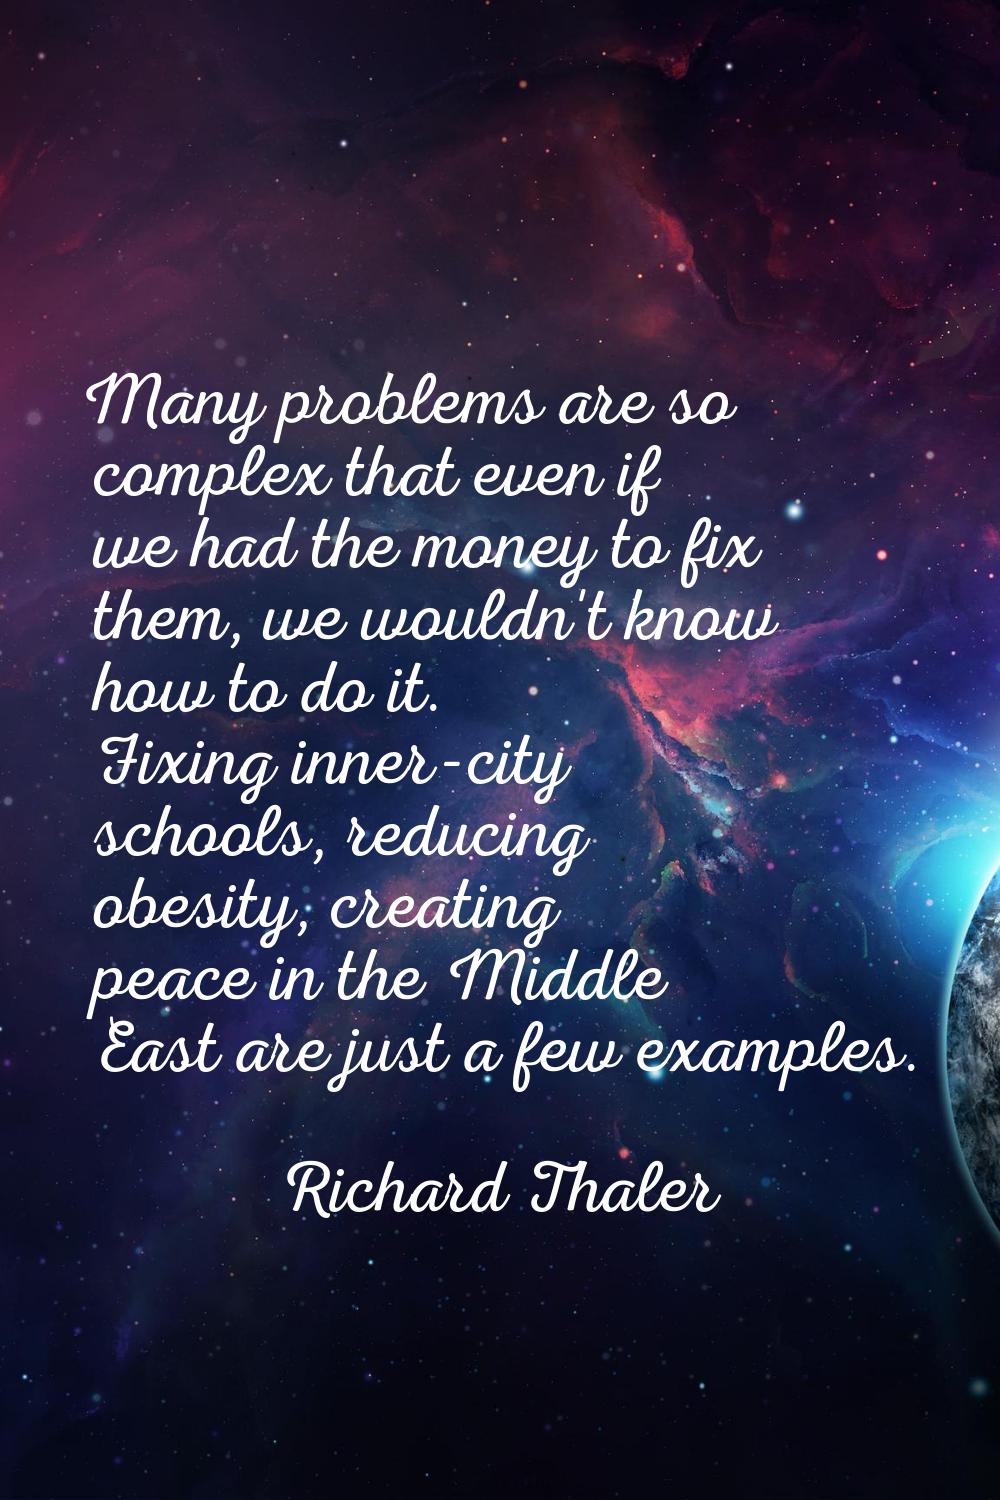 Many problems are so complex that even if we had the money to fix them, we wouldn't know how to do 